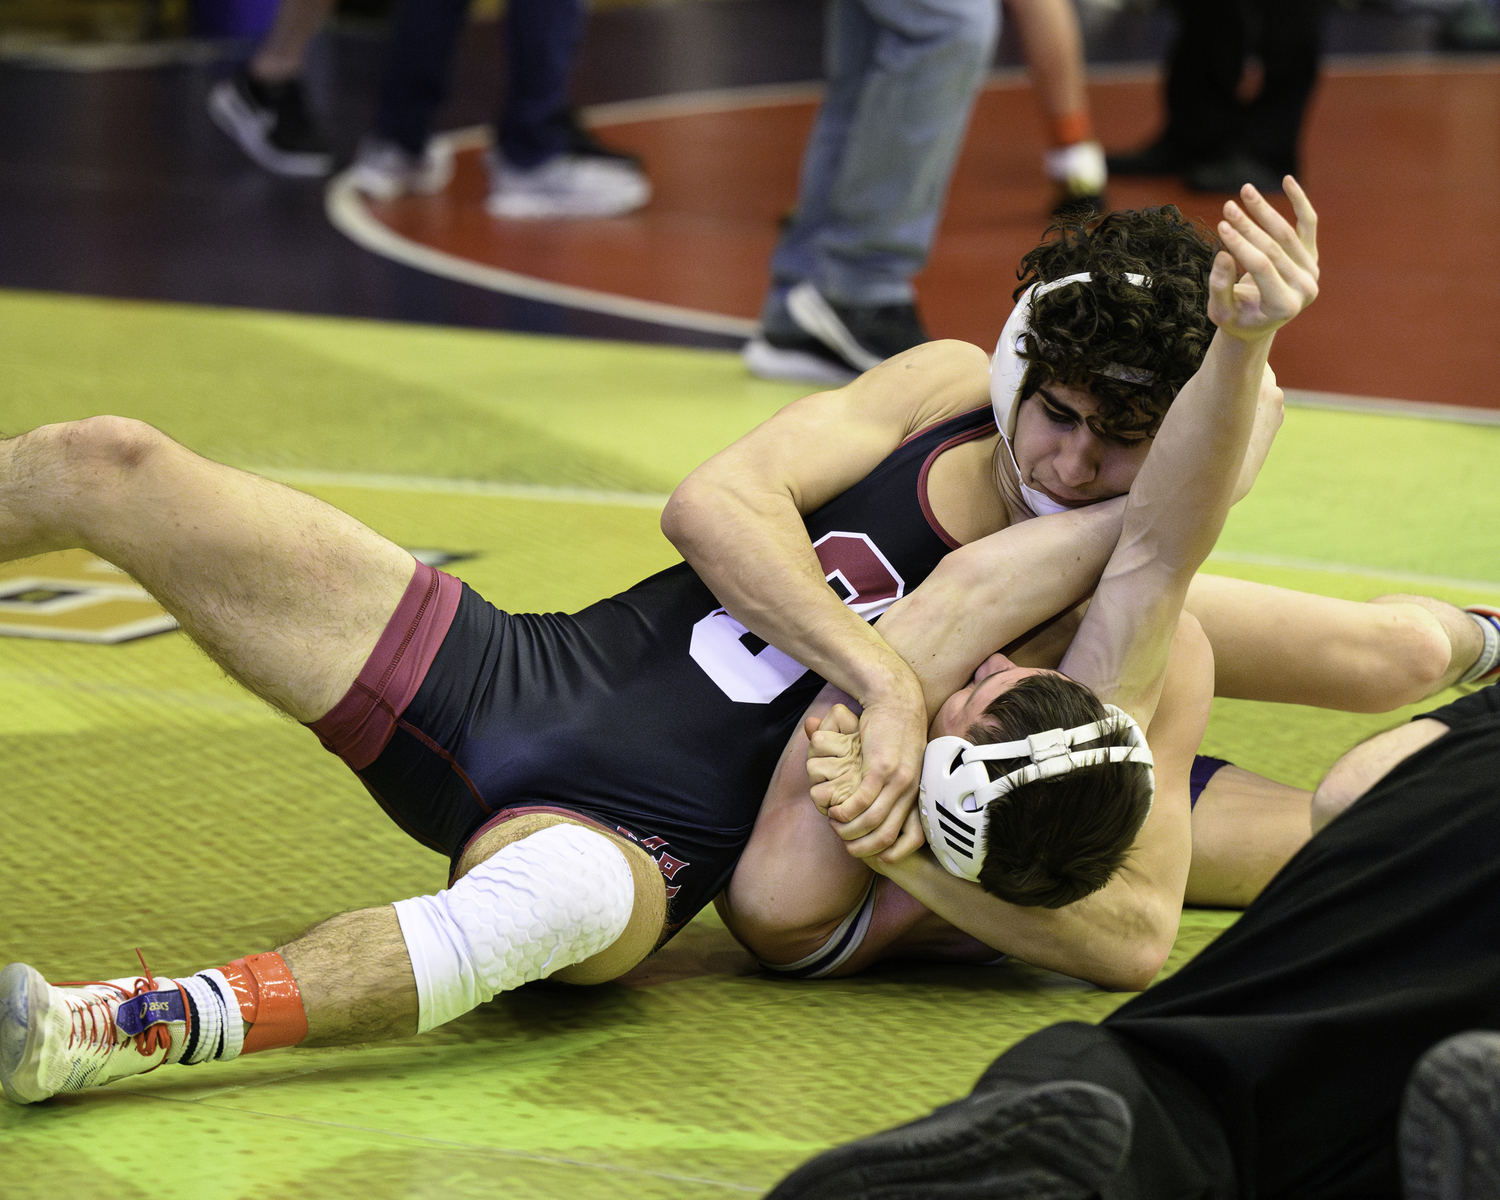 Southampton senior Jack Nastri with a headlock on Port Jefferson's Cade Delgado who he pinned in the first period of the match for 